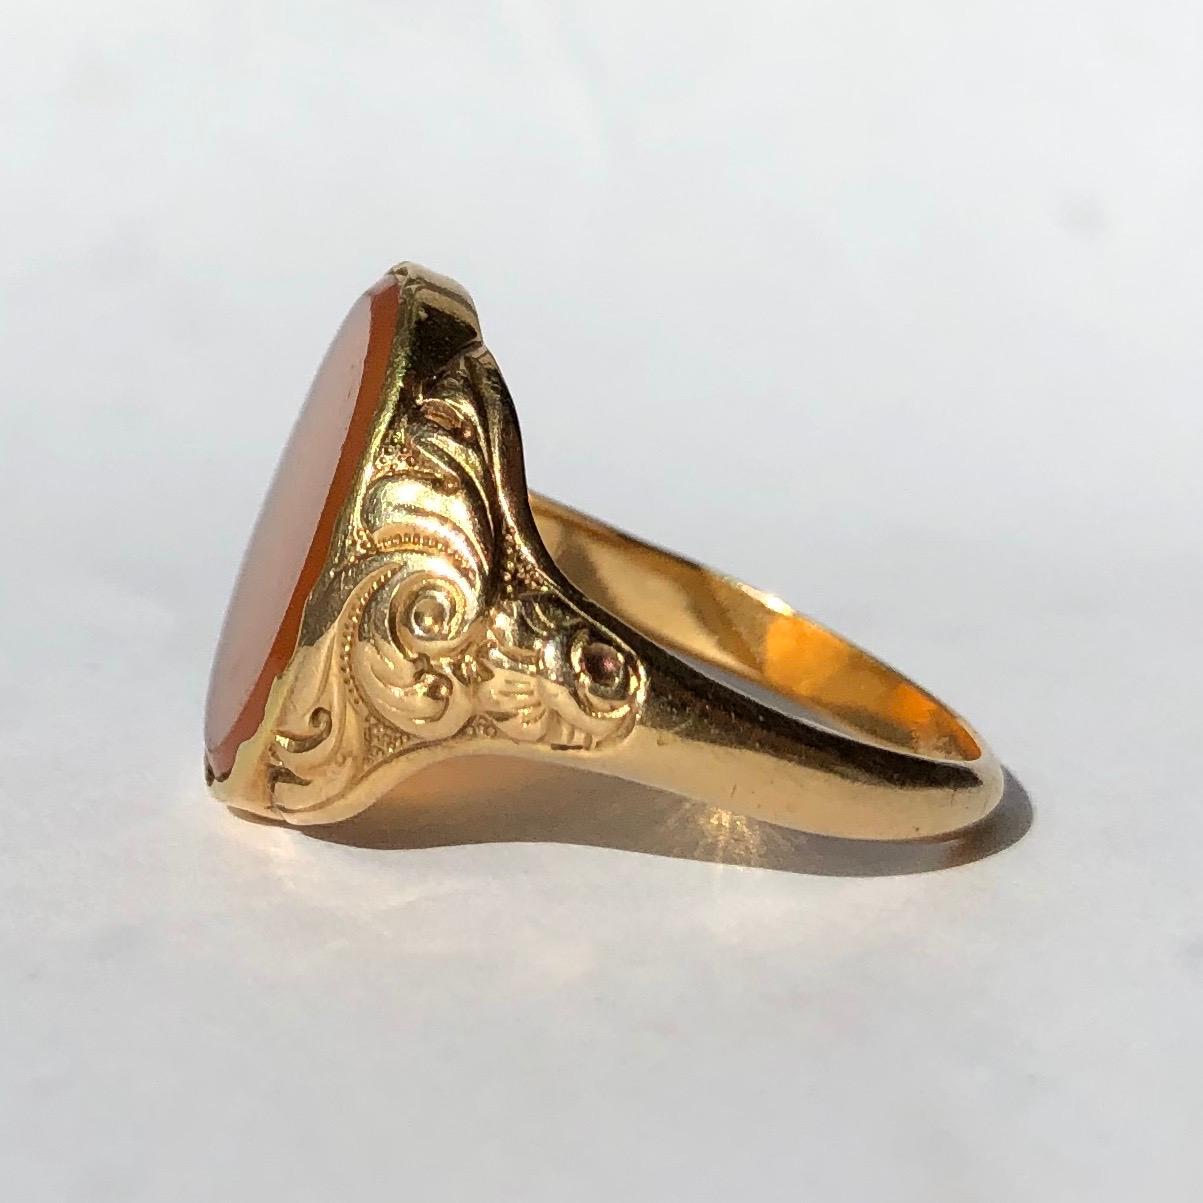 This ornate ring holds an oval agate stone which is a gorgeous amber colour and has flecks of deep red. The shoulders have a stunning moulded scroll and floral design. The stone is set within the 9ct gold. 

Ring Size: R or 8 1/2 
Stone Dimensions: